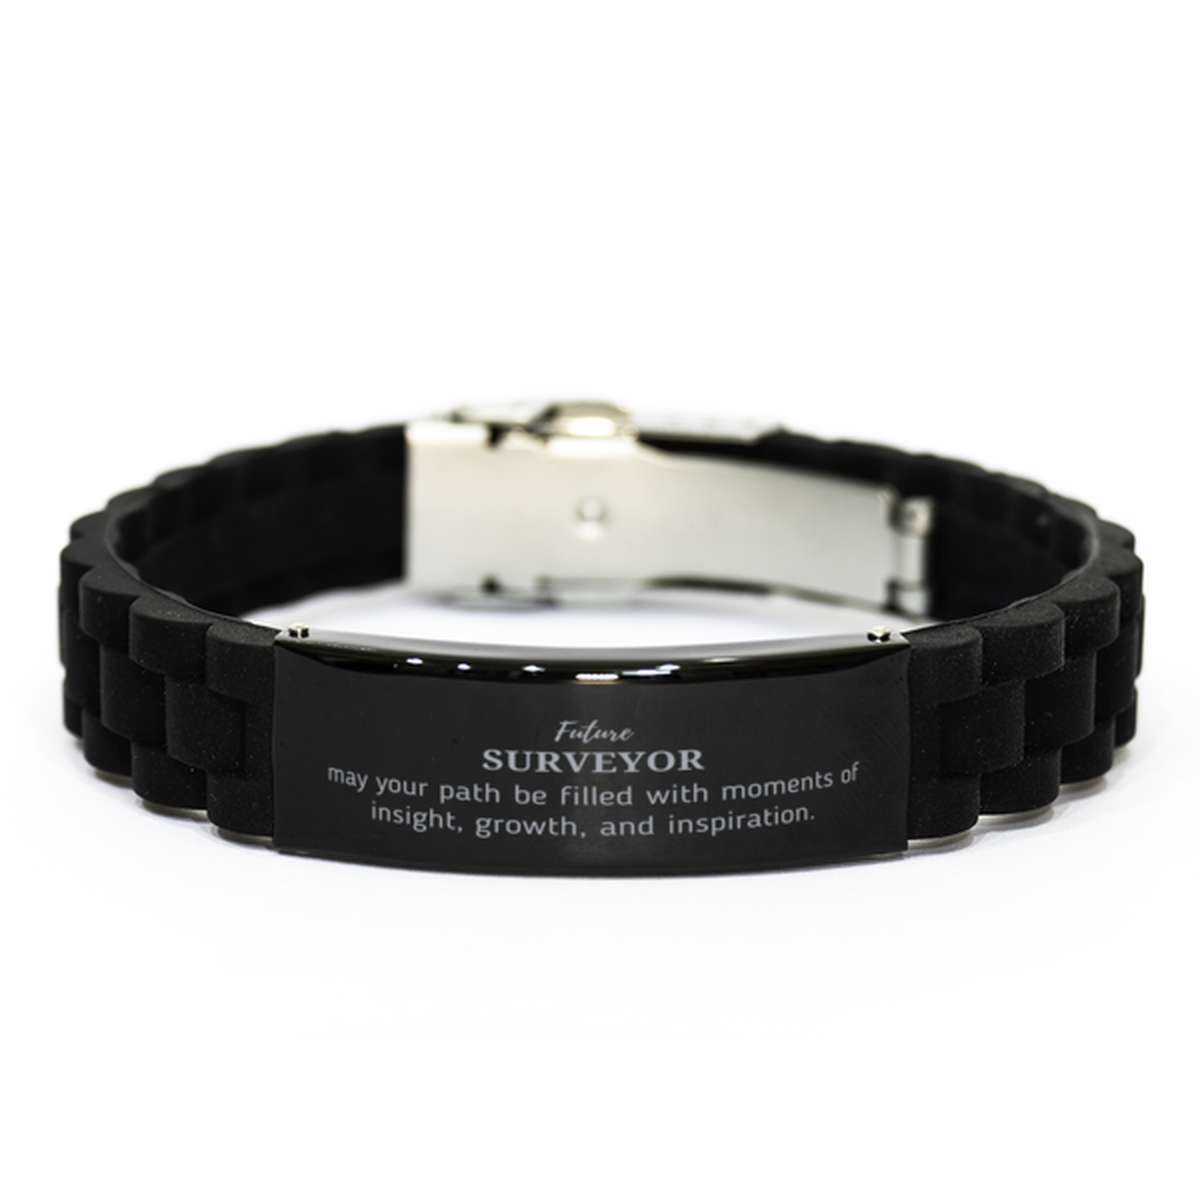 Future Surveyor Gifts, May your path be filled with moments of insight, Graduation Gifts for New Surveyor, Christmas Unique Black Glidelock Clasp Bracelet For Men, Women, Friends